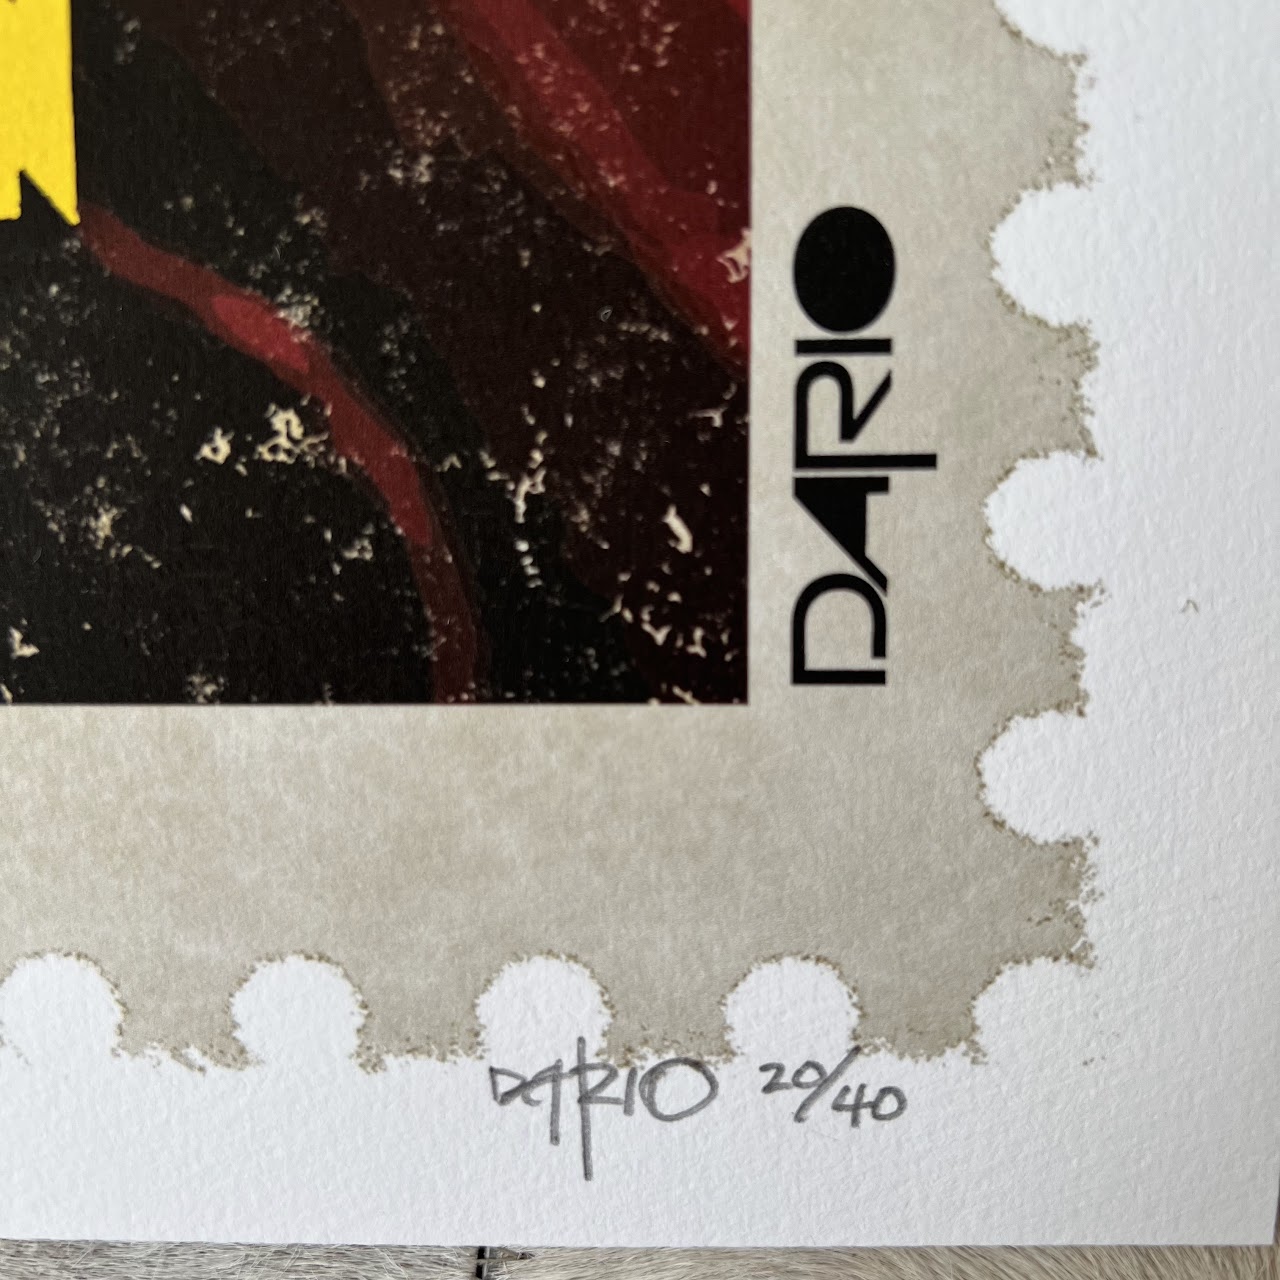 Dario 'OB4CL Stamp' Signed Limited Edition Silkscreen